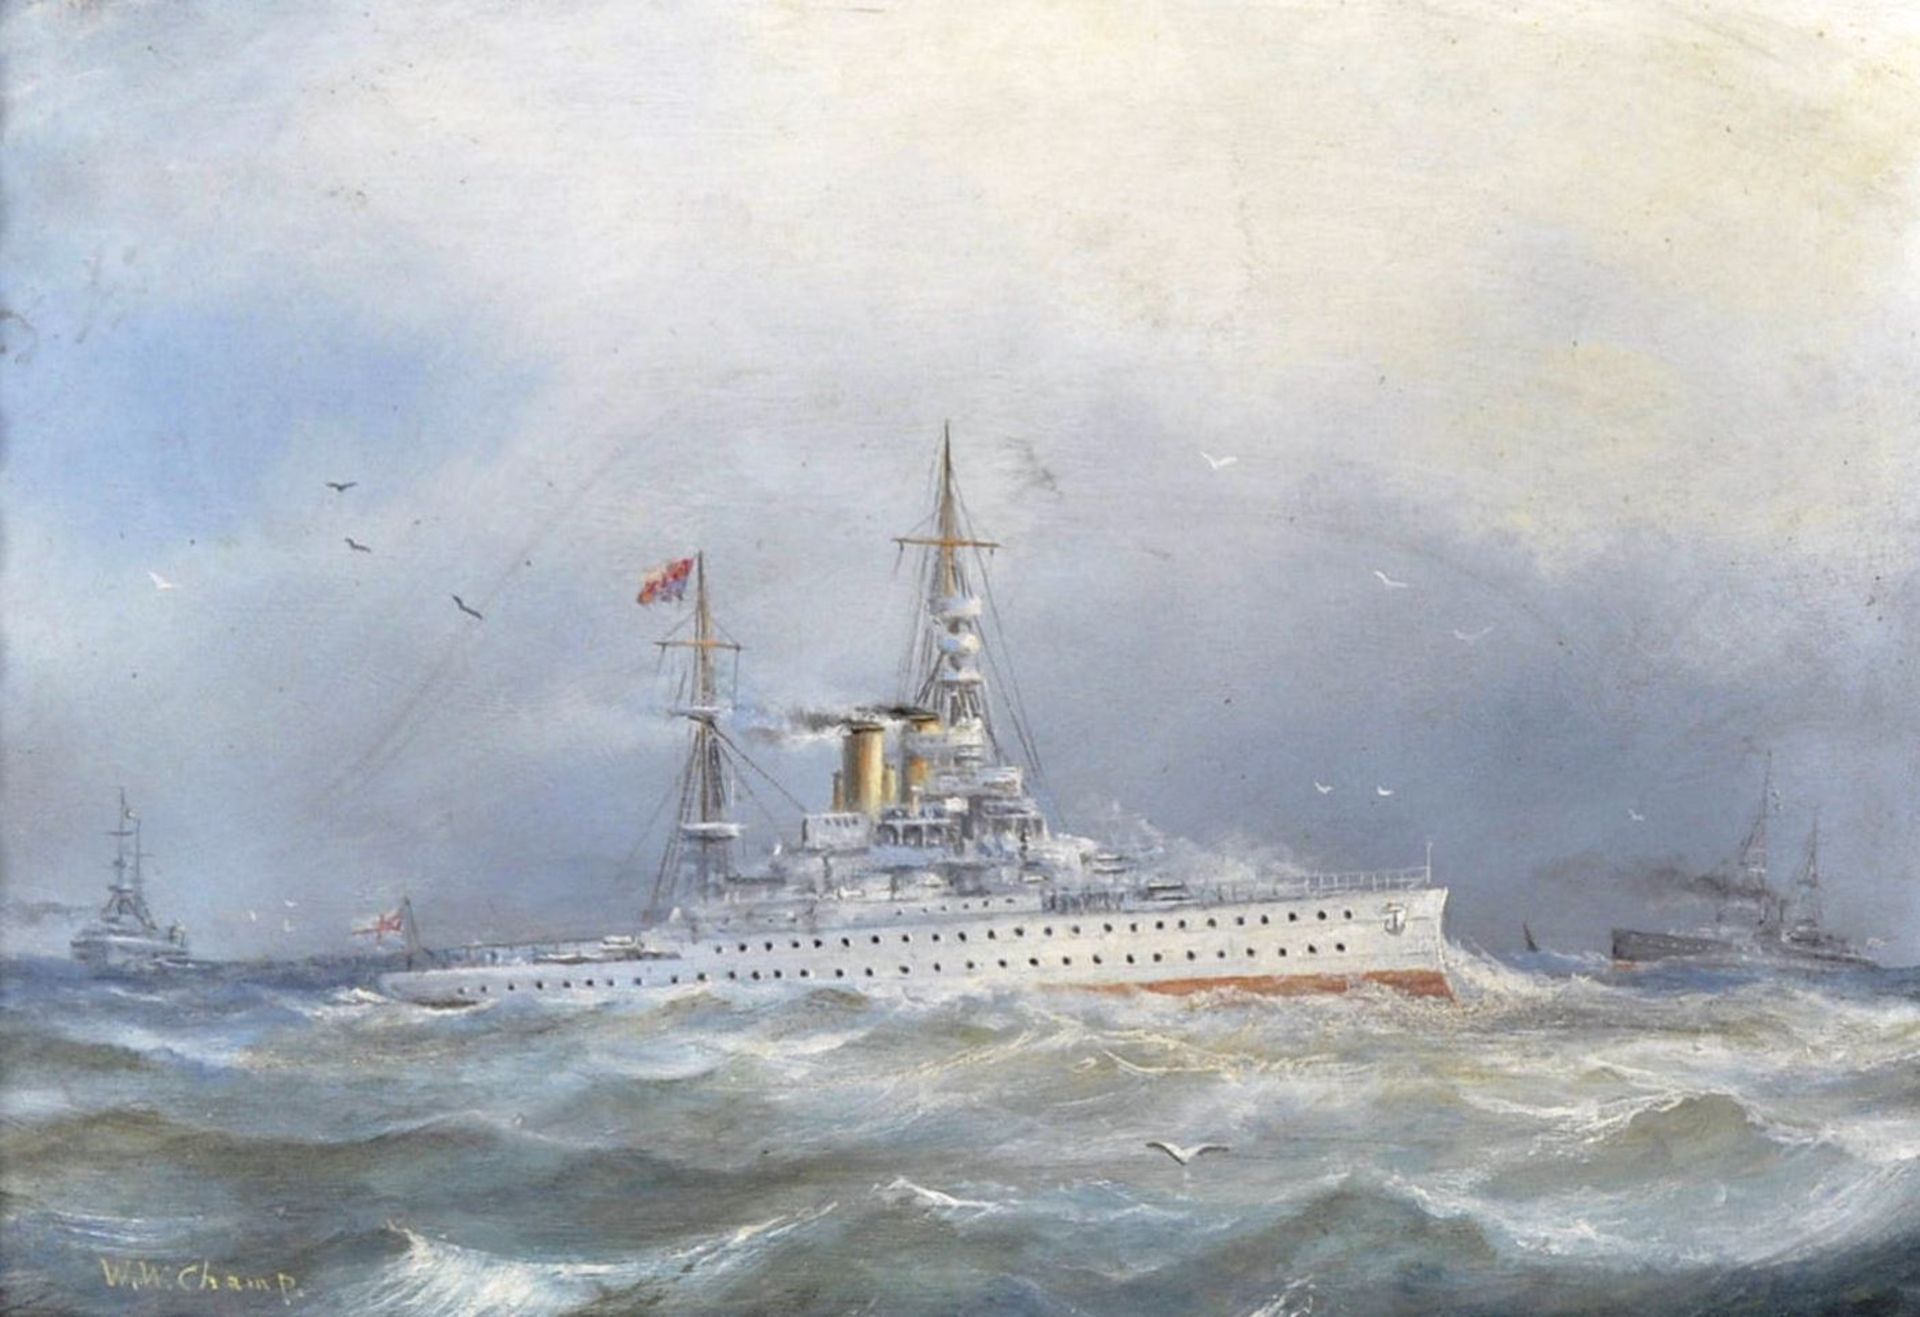 W W CHAMP - OIL ON BOARD OF THE FLAGSHIP HMS BARHAM - Image 2 of 9